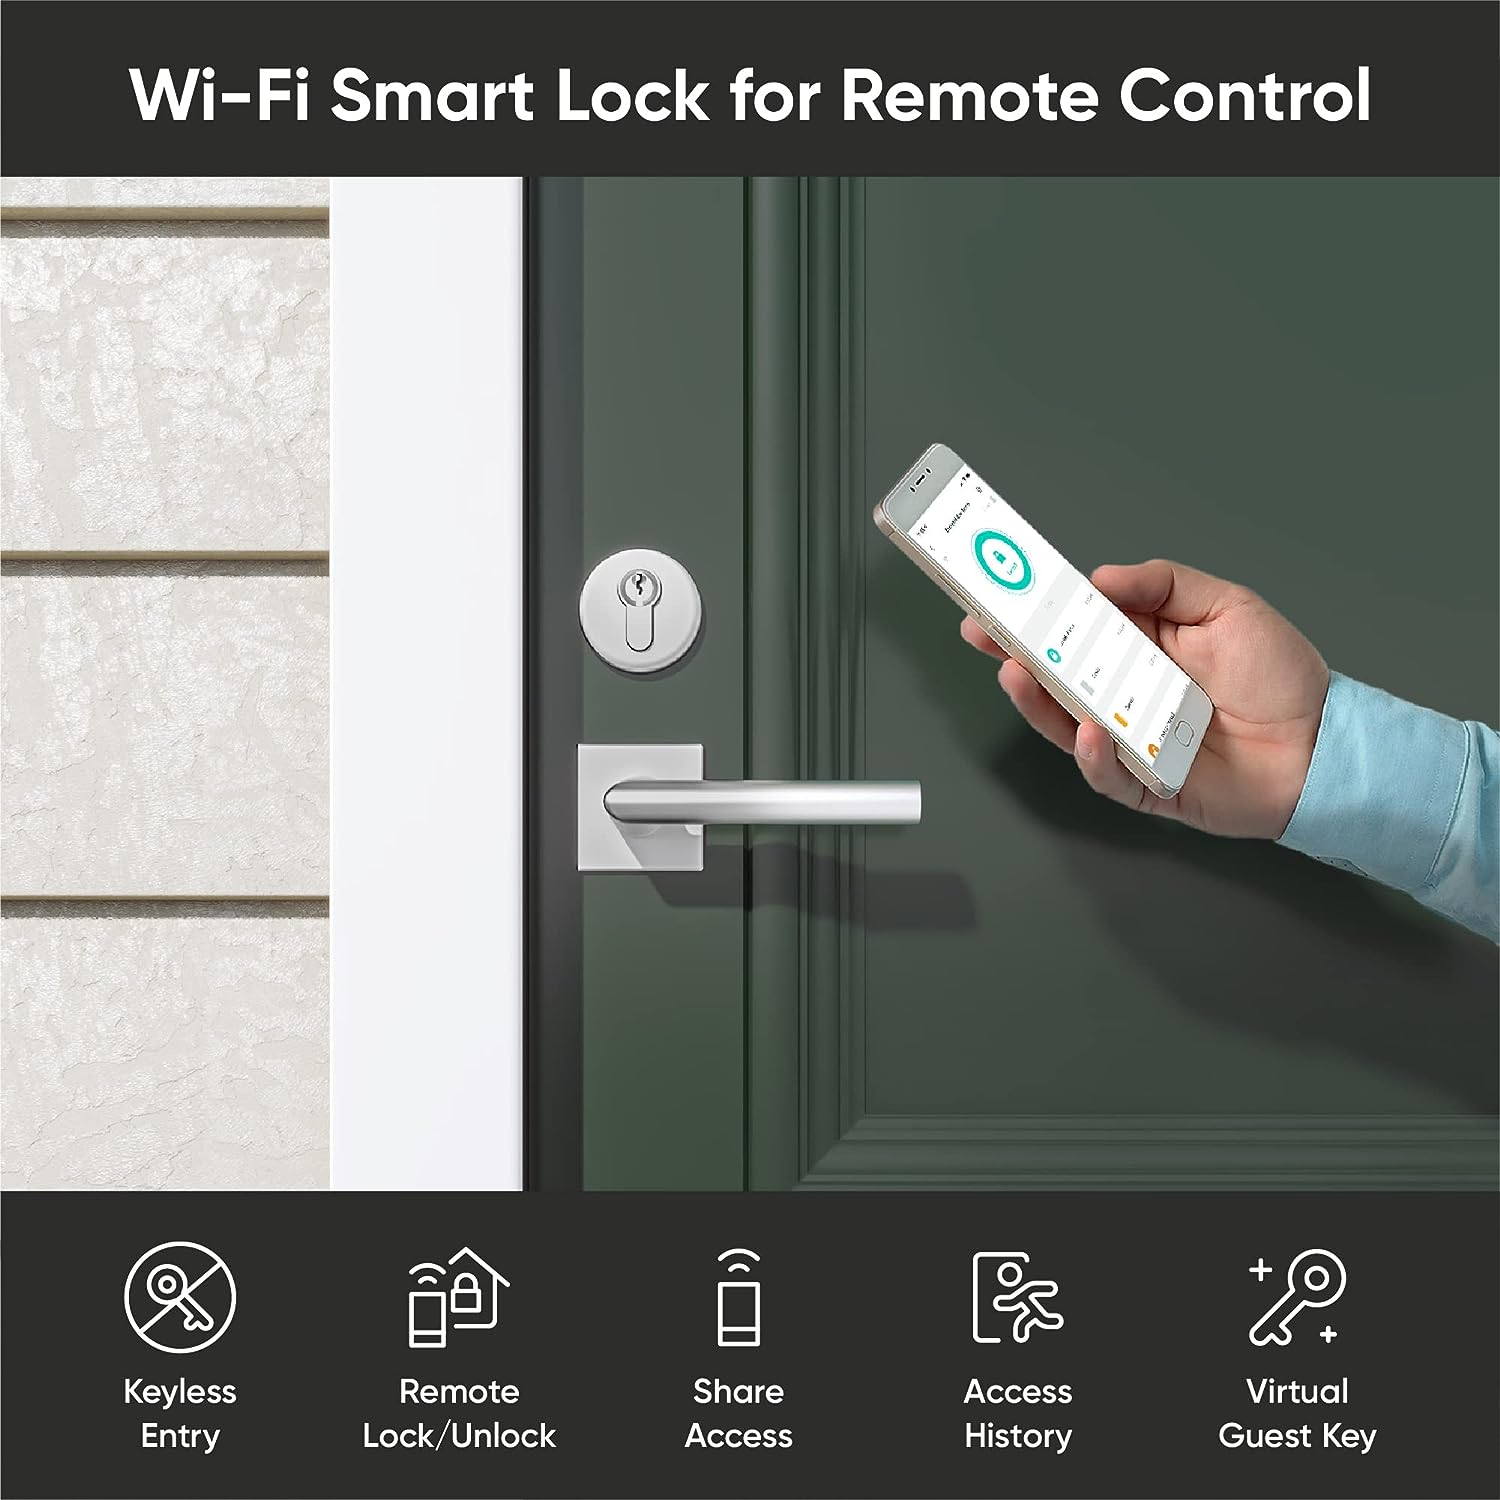 keyless entry picture using phone to unlock the door. Wyze smart lock solutions for aging in place | AskSAMIE